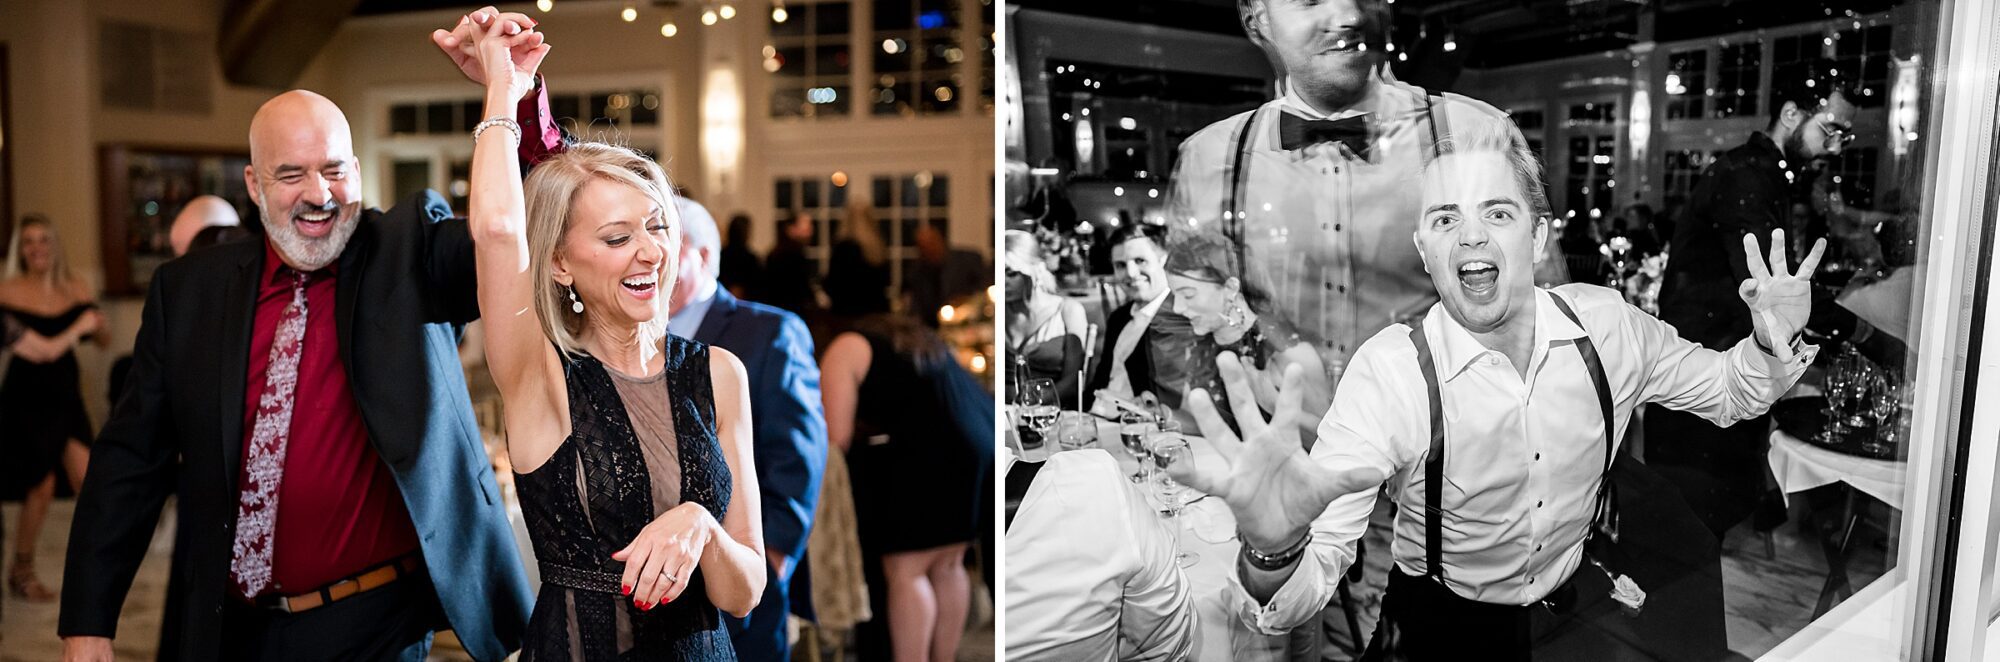 Two black and white photos of people dancing at a wedding.